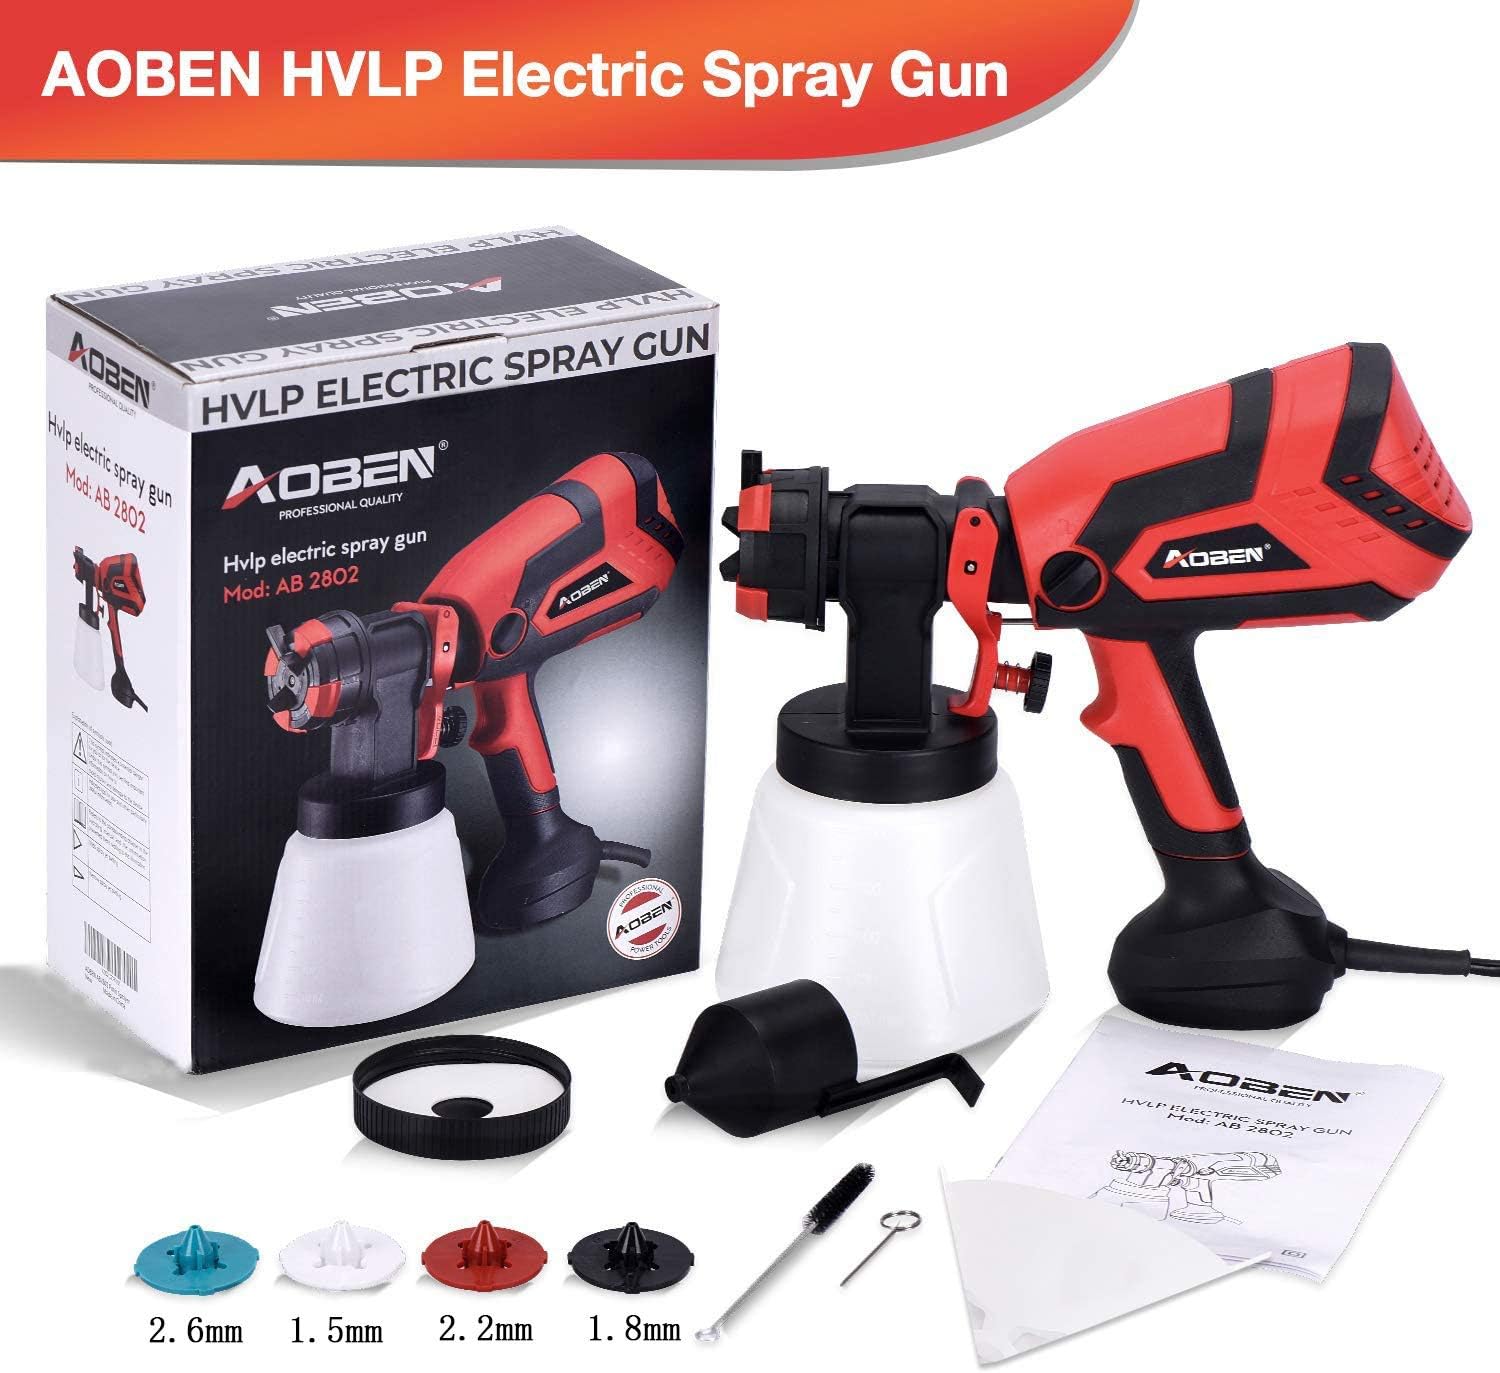 AOBEN Paint Sprayer, 750W Hvlp Spray Gun, Electric Paint Gun with 4 Nozzles, 1000ml Container for Home and Outdoors, Painting Project